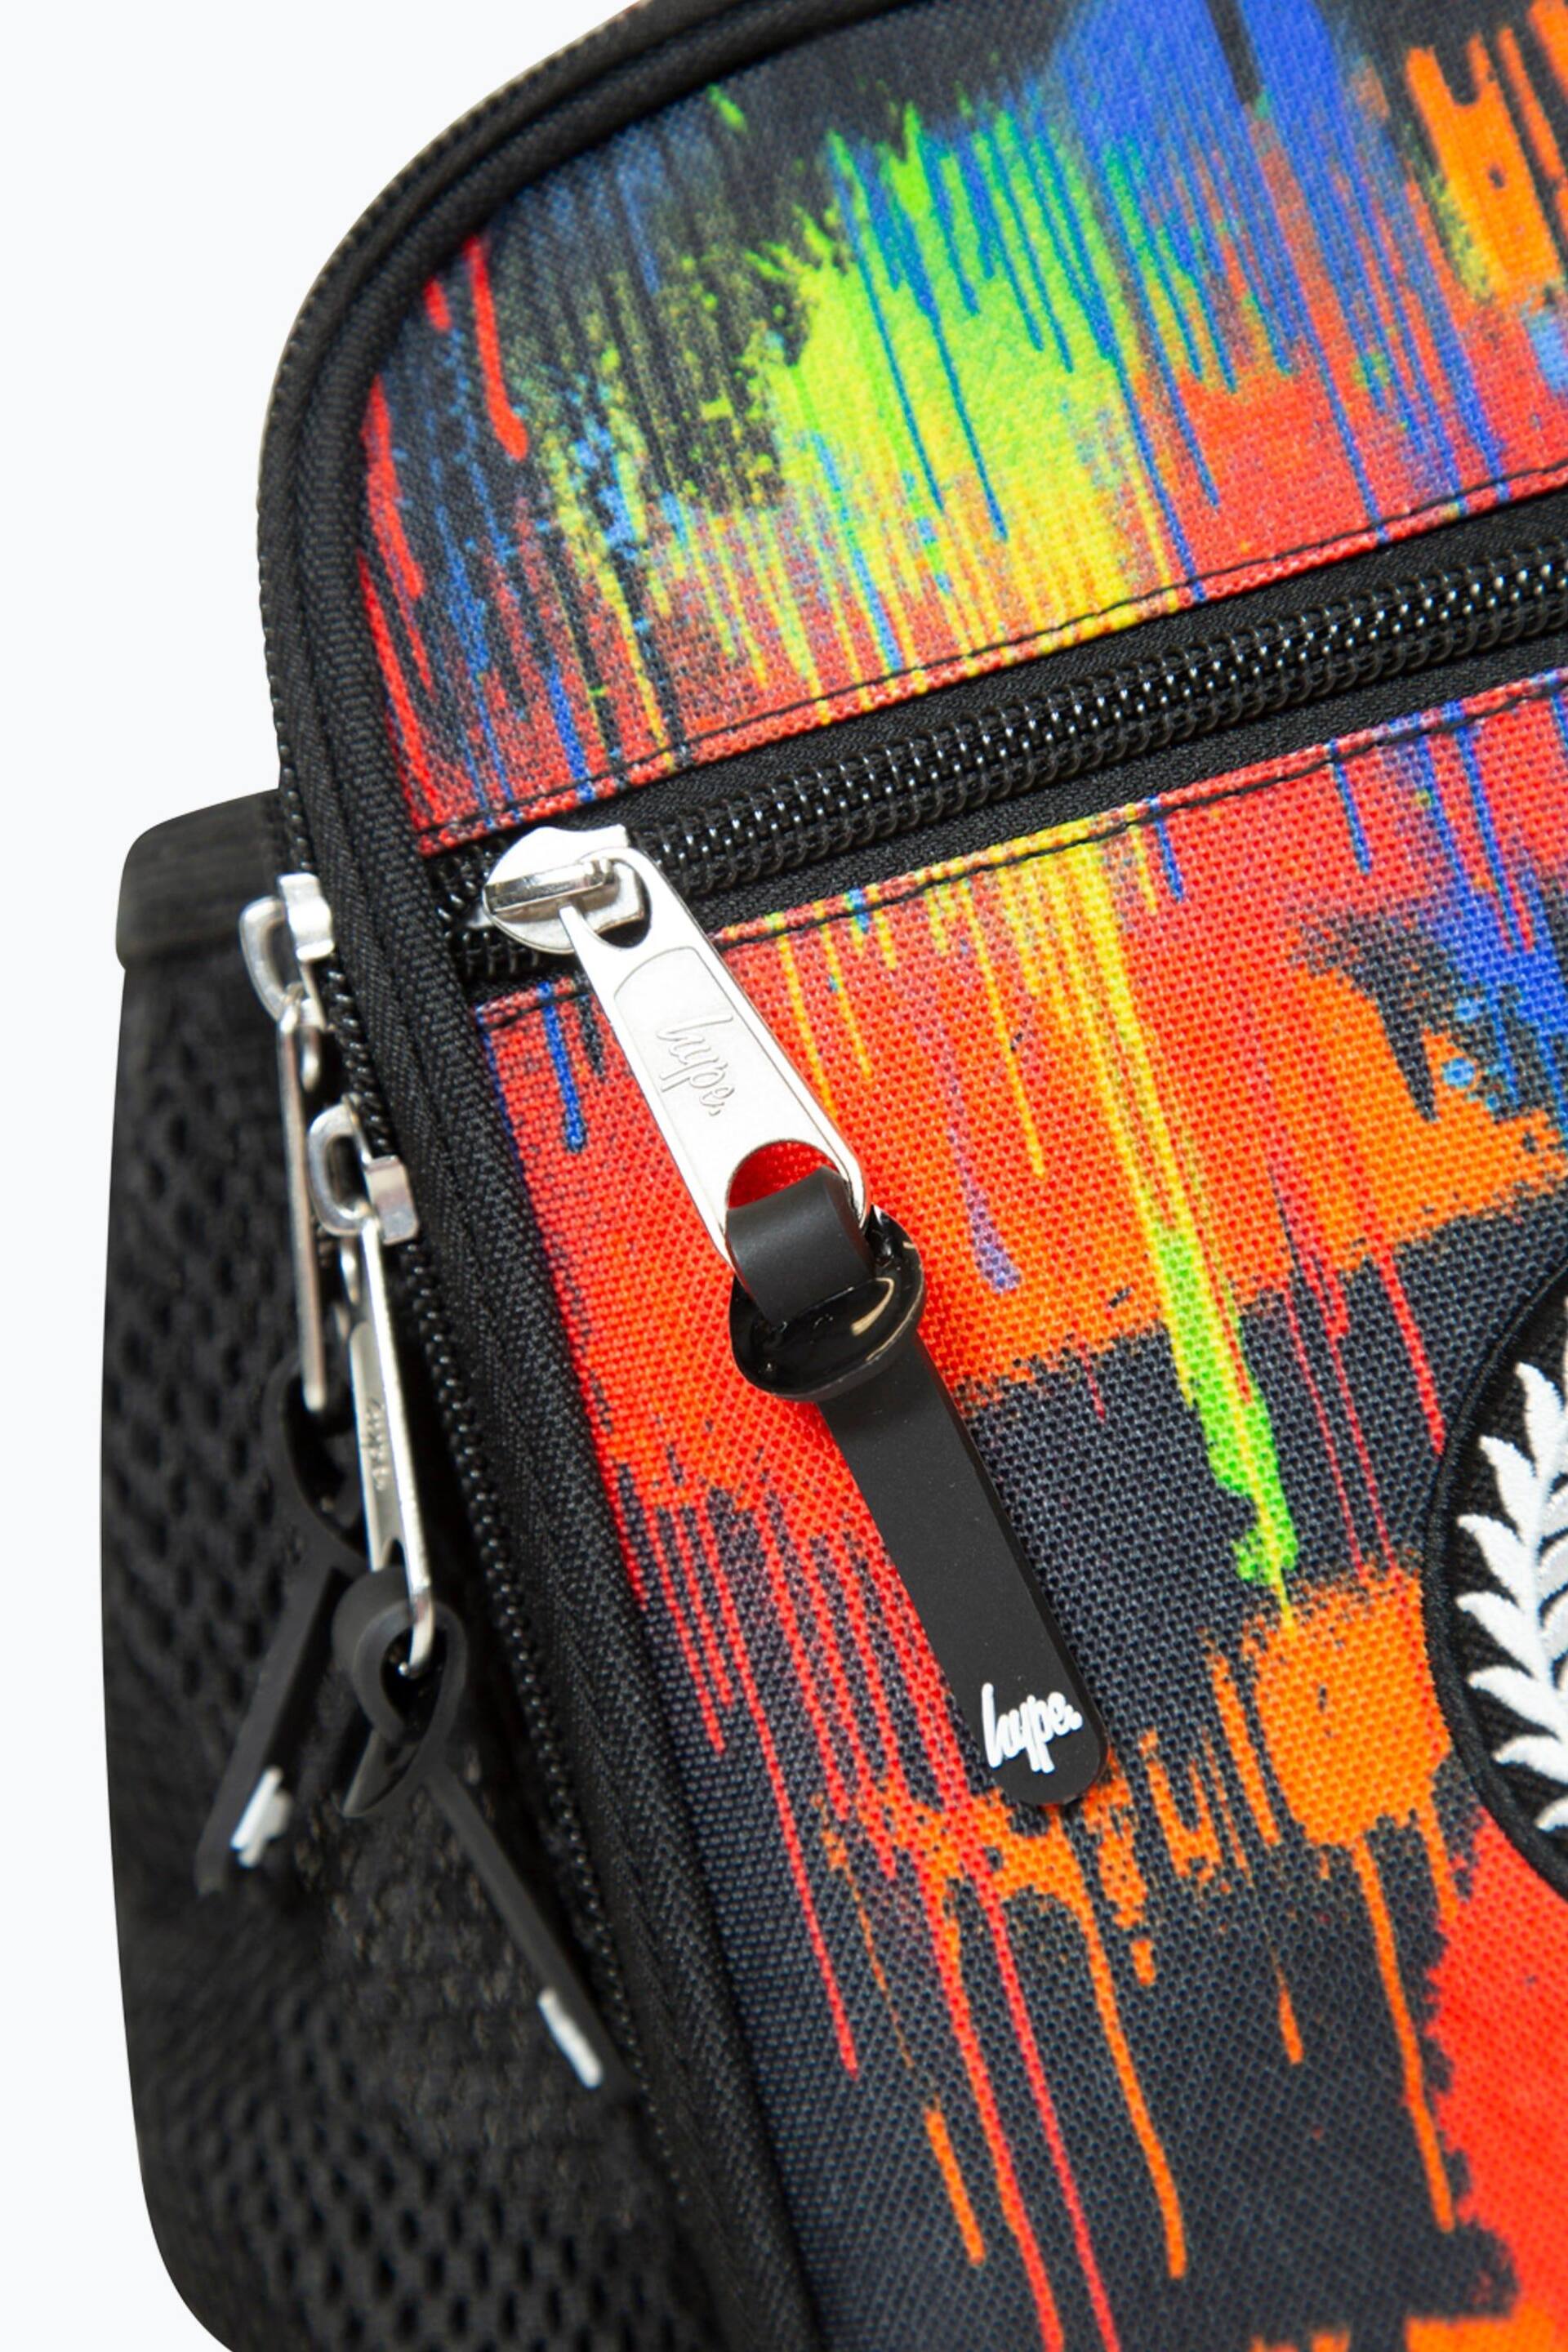 Hype. Multi Spray Paint Lunch Box - Image 5 of 8